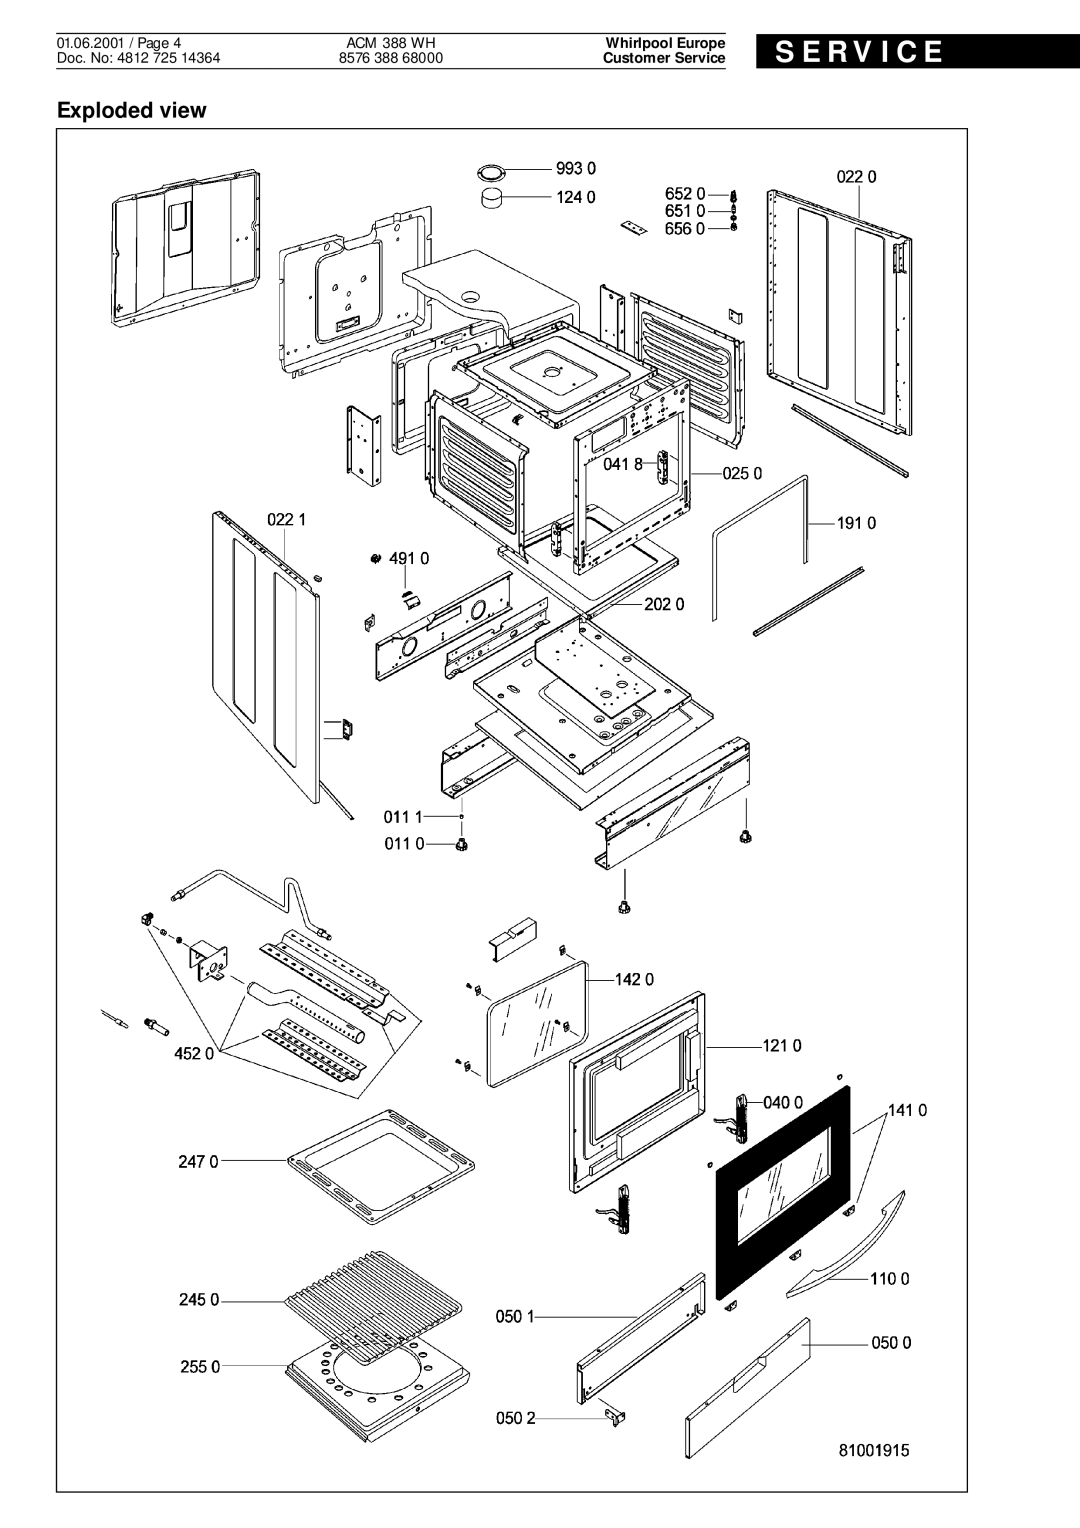 Whirlpool ACM 388 WH service manual Exploded view, S E R V I C E, Whirlpool Europe, Customer Service 